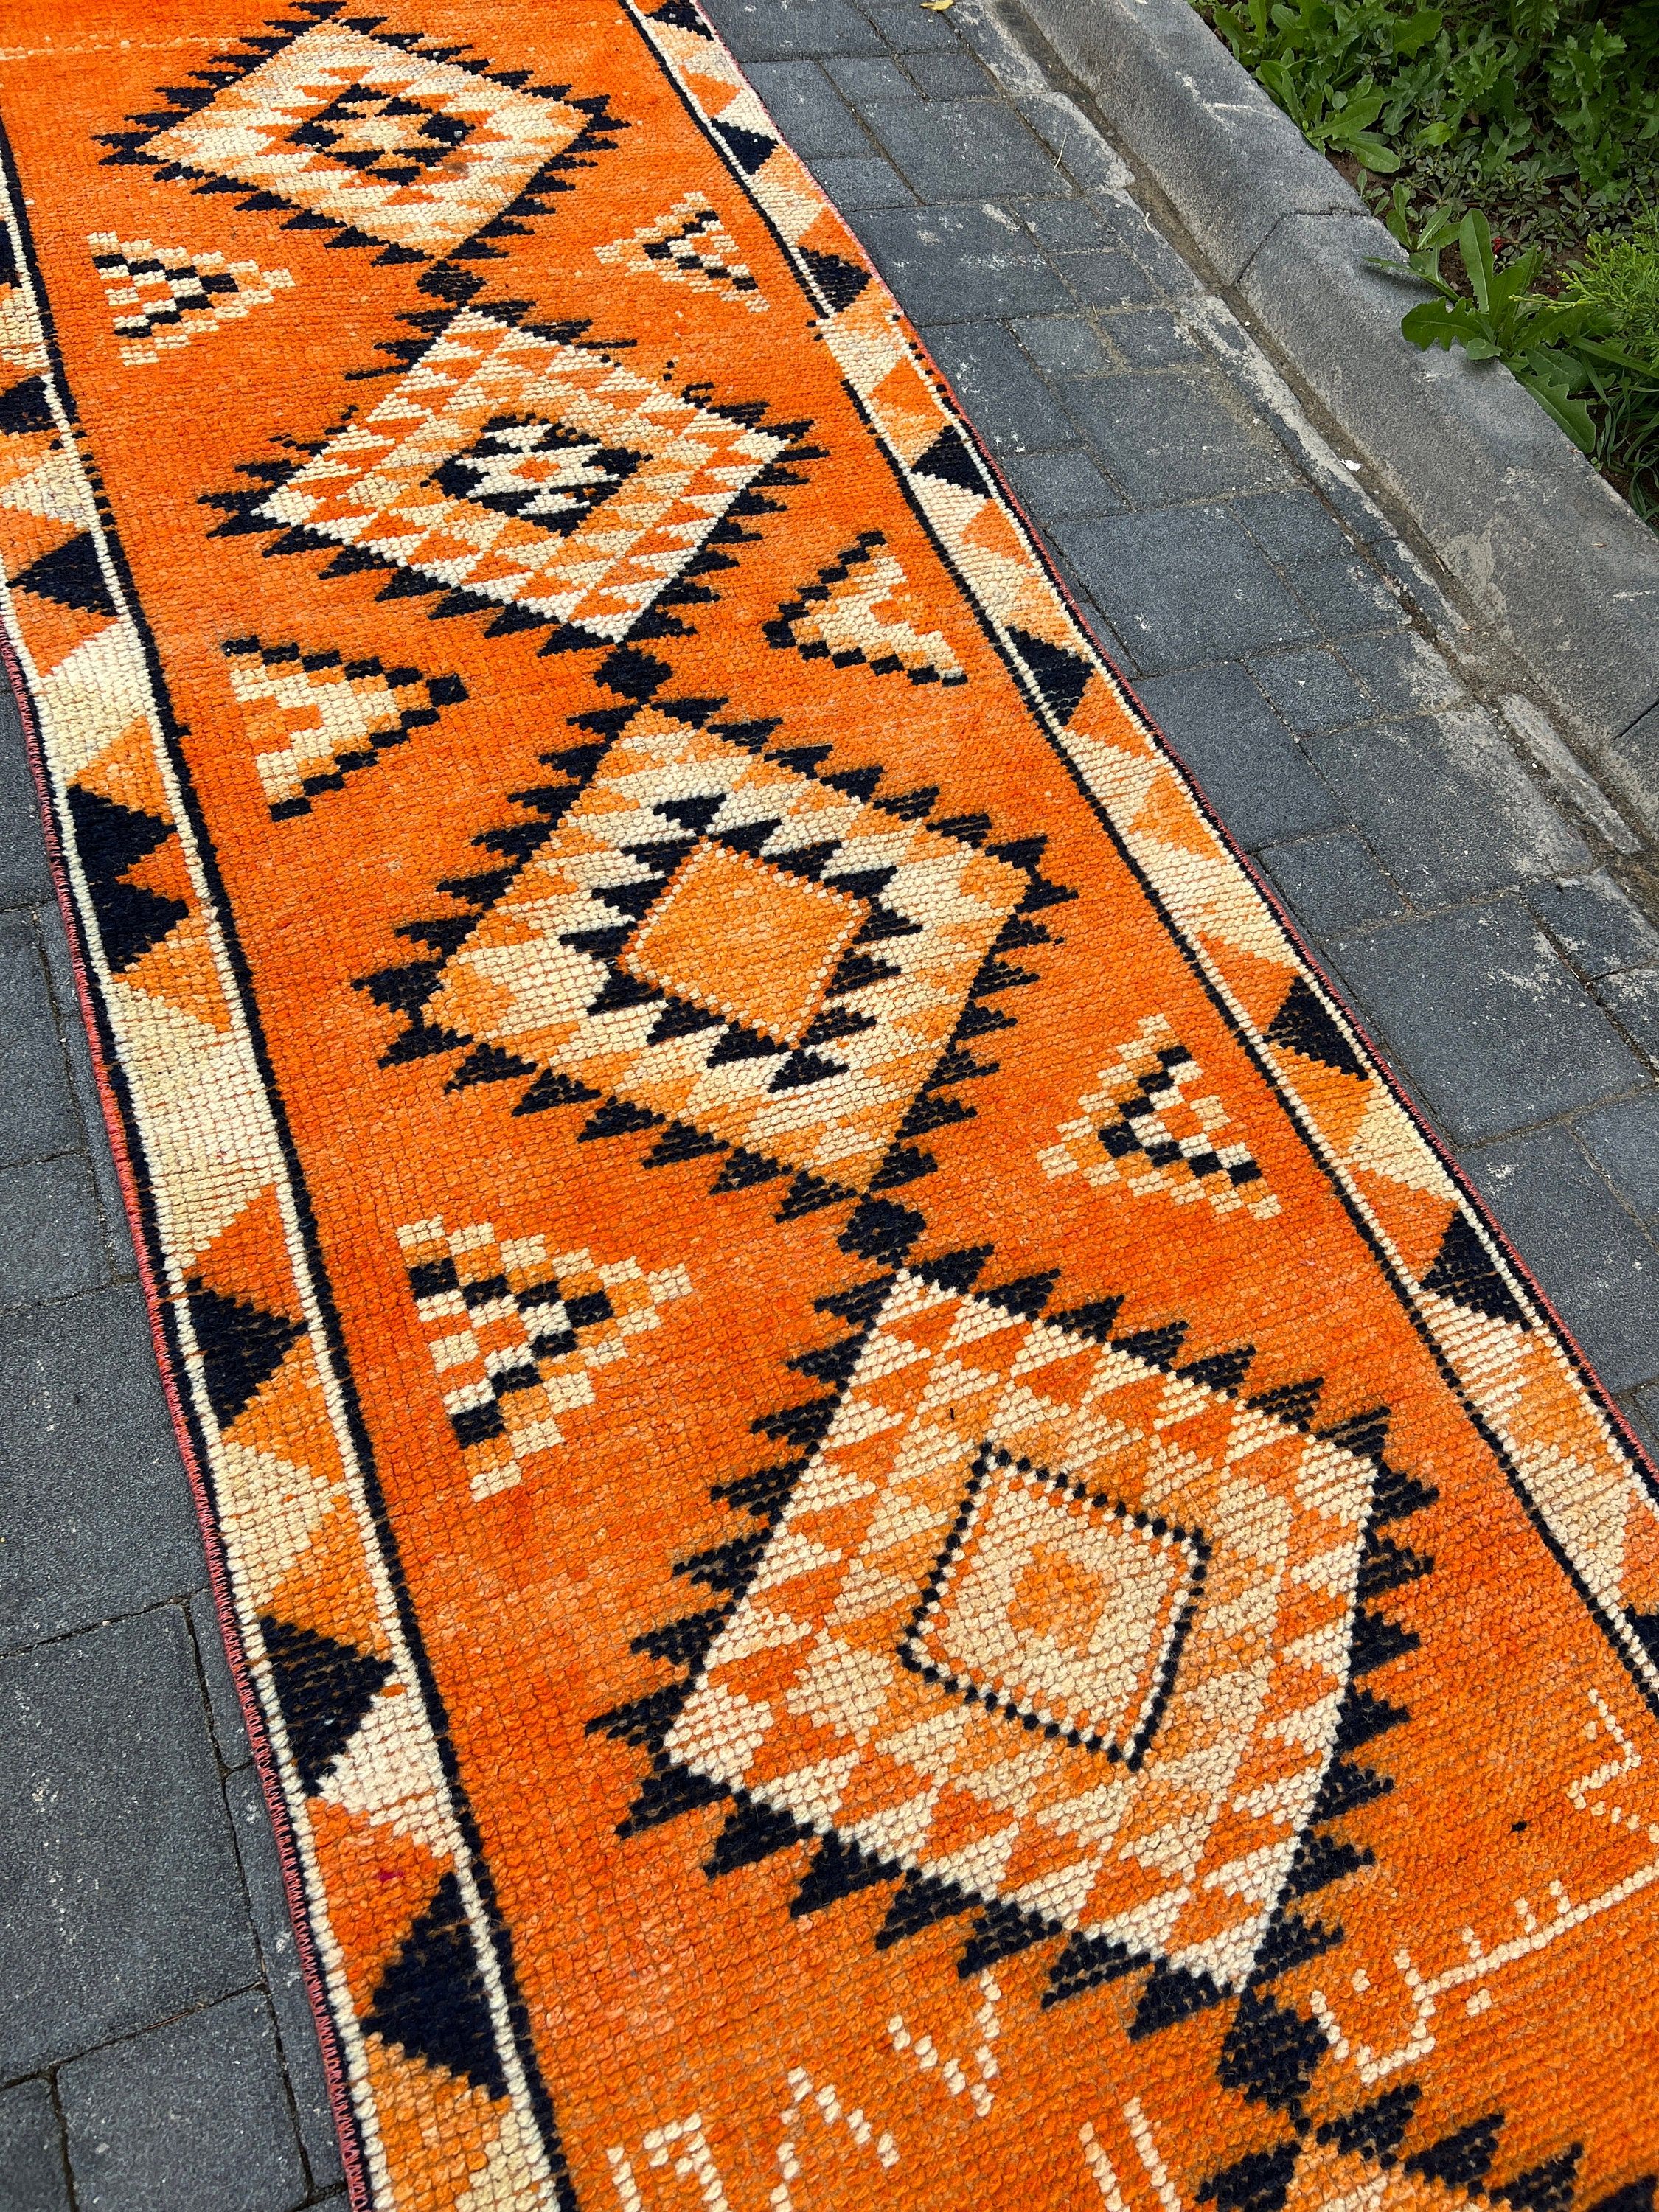 Authentic Rug, 2.9x12.4 ft Runner Rug, Vintage Rug, Turkish Rugs, Kitchen Rugs, Rugs for Kitchen, Home Decor Rugs, Orange Kitchen Rug